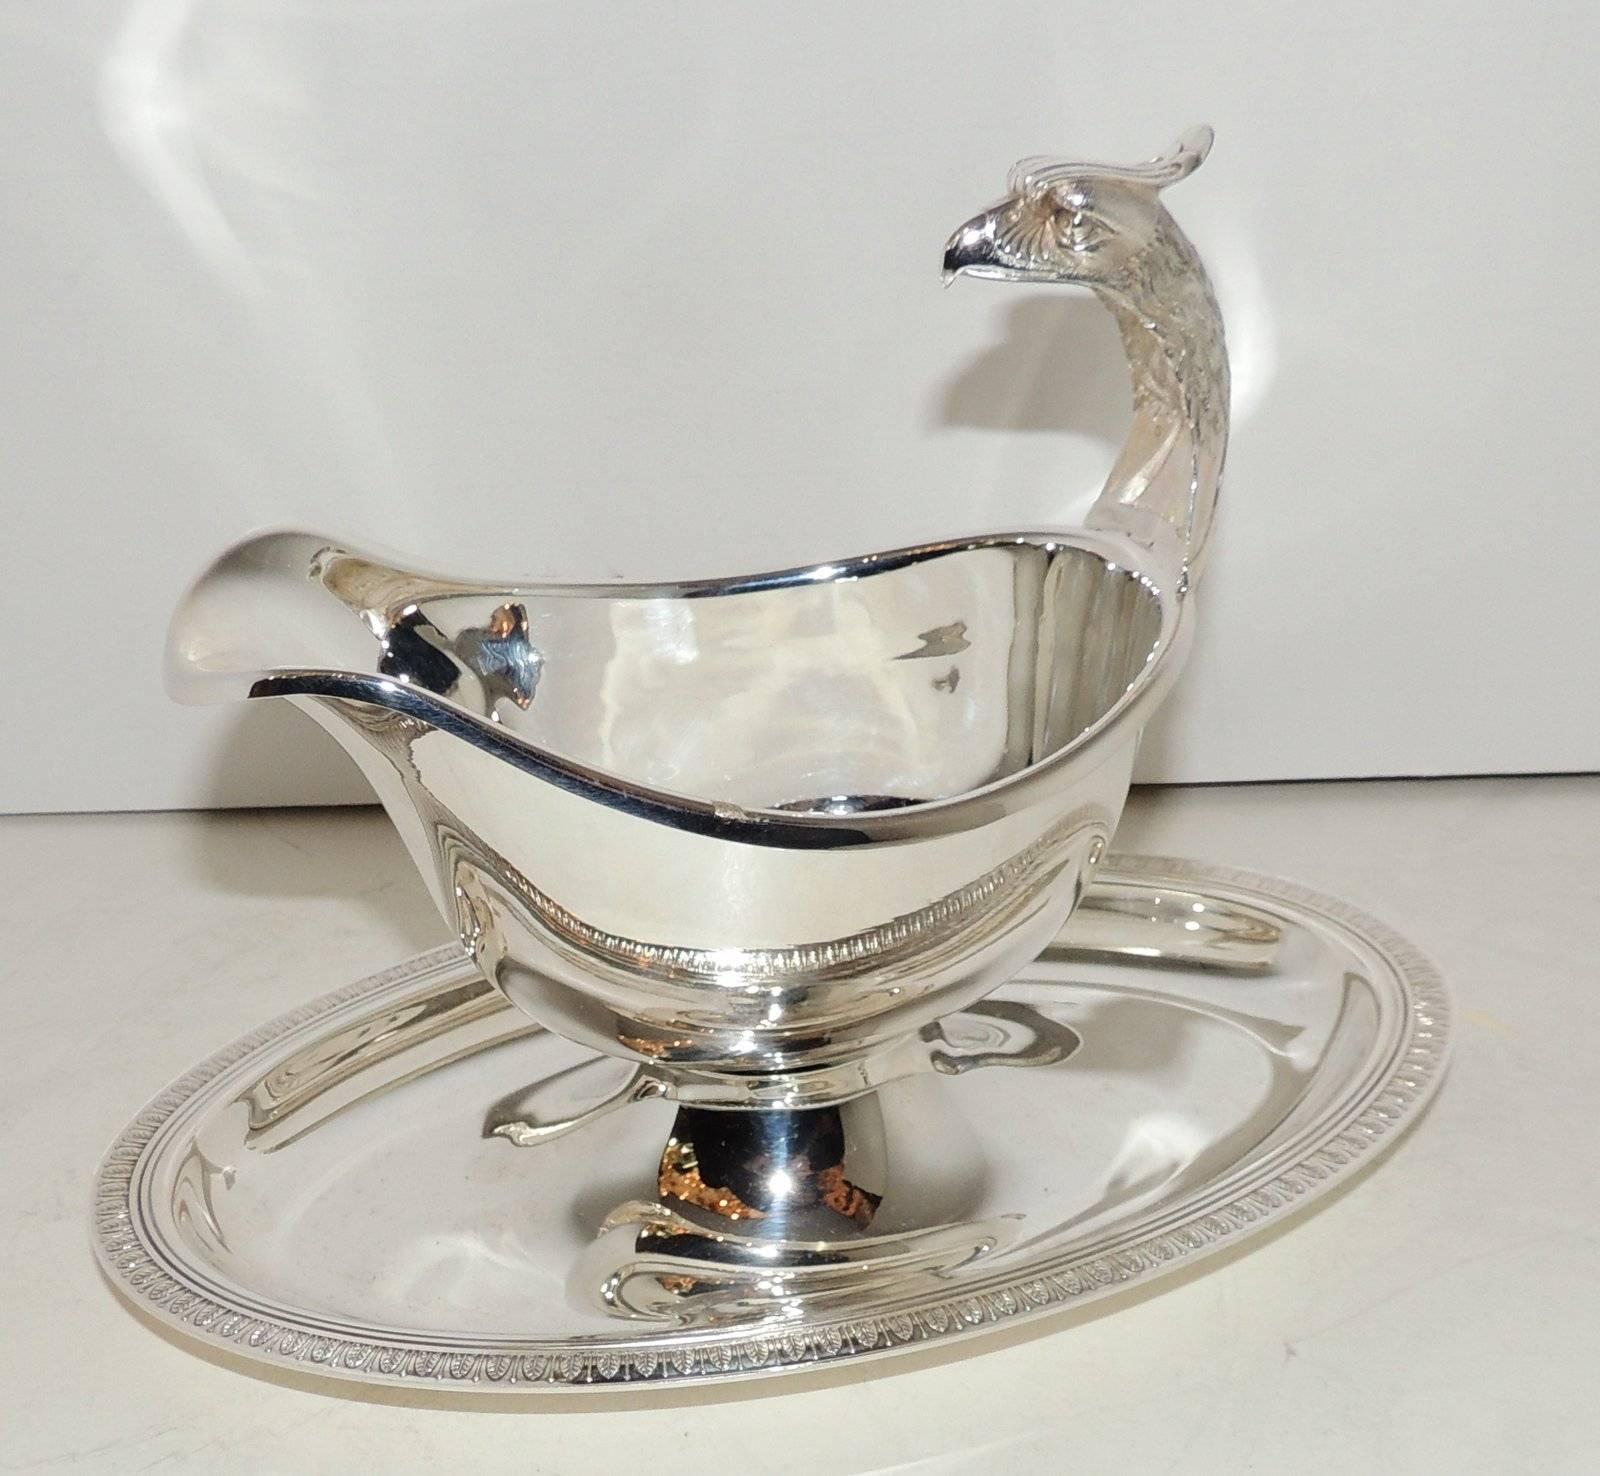  Wonderful Christofle Malmaison  Pedestal Silver Plate Gravy Server. The pattern Malmaison Is In the Regency Empire style, with it's frieze of delicate palm and lotus leaves and symmetrical design Finished With Swan Handel Centerpiece.

Measures